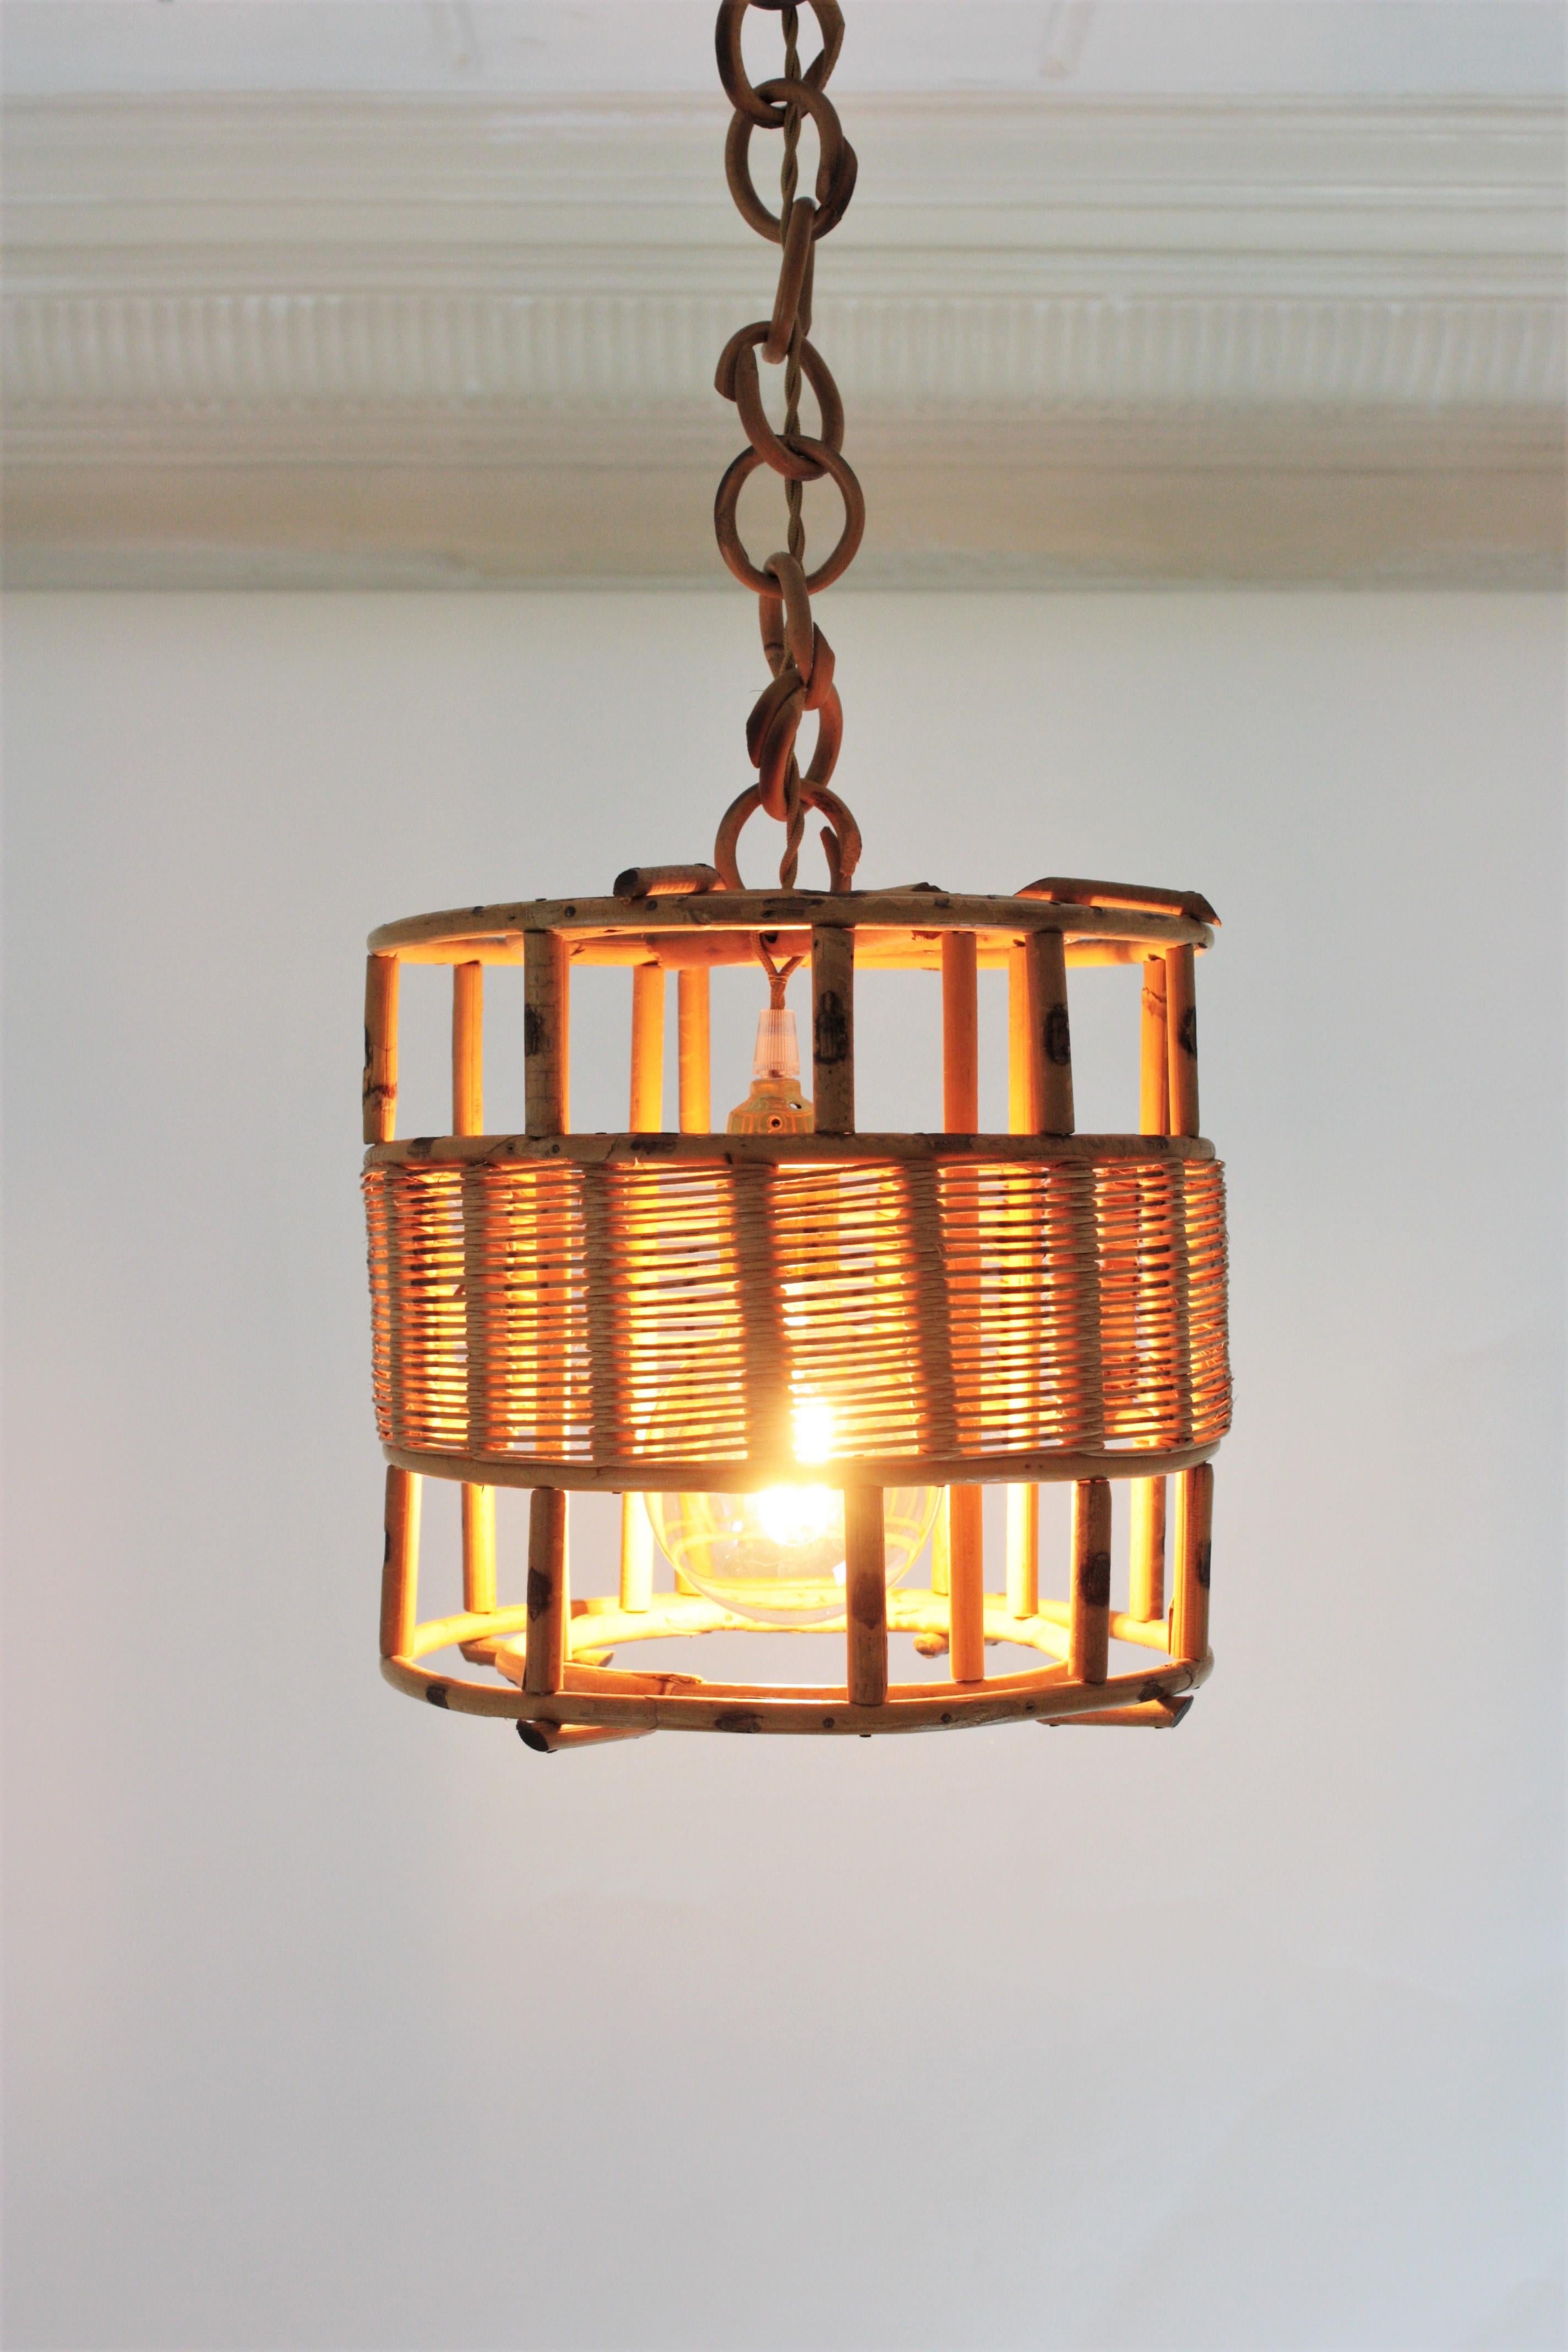 20th Century French Rattan Cylinder Pendant Light or Lantern, 1950s For Sale